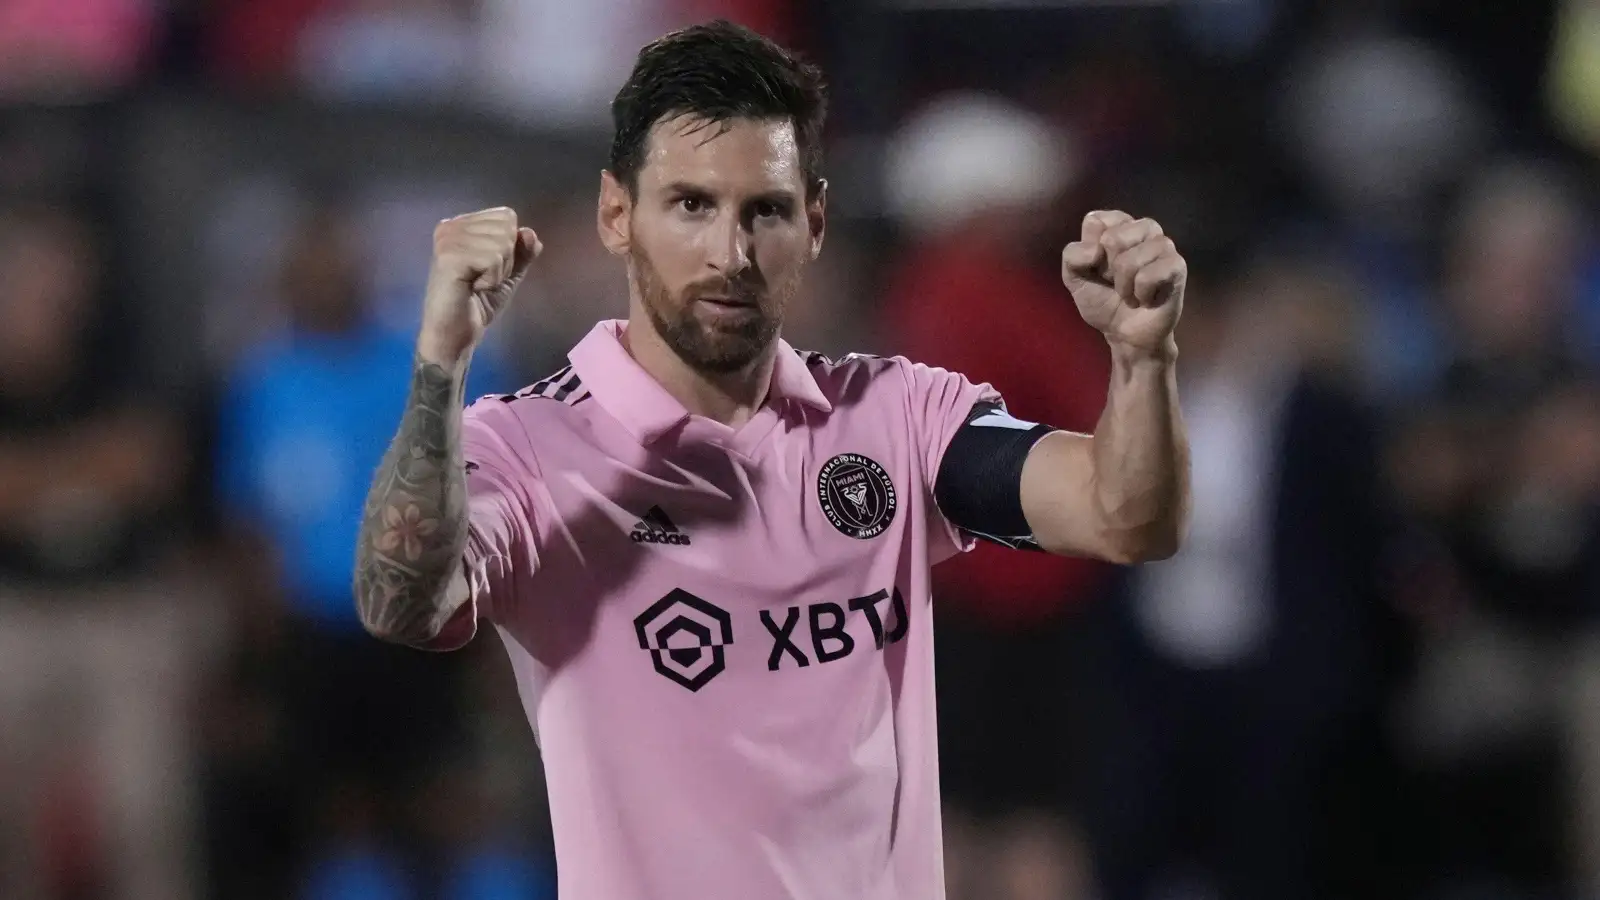 Grab your popcorn and join us in watching Messi’s latest MLS clinic on repeat